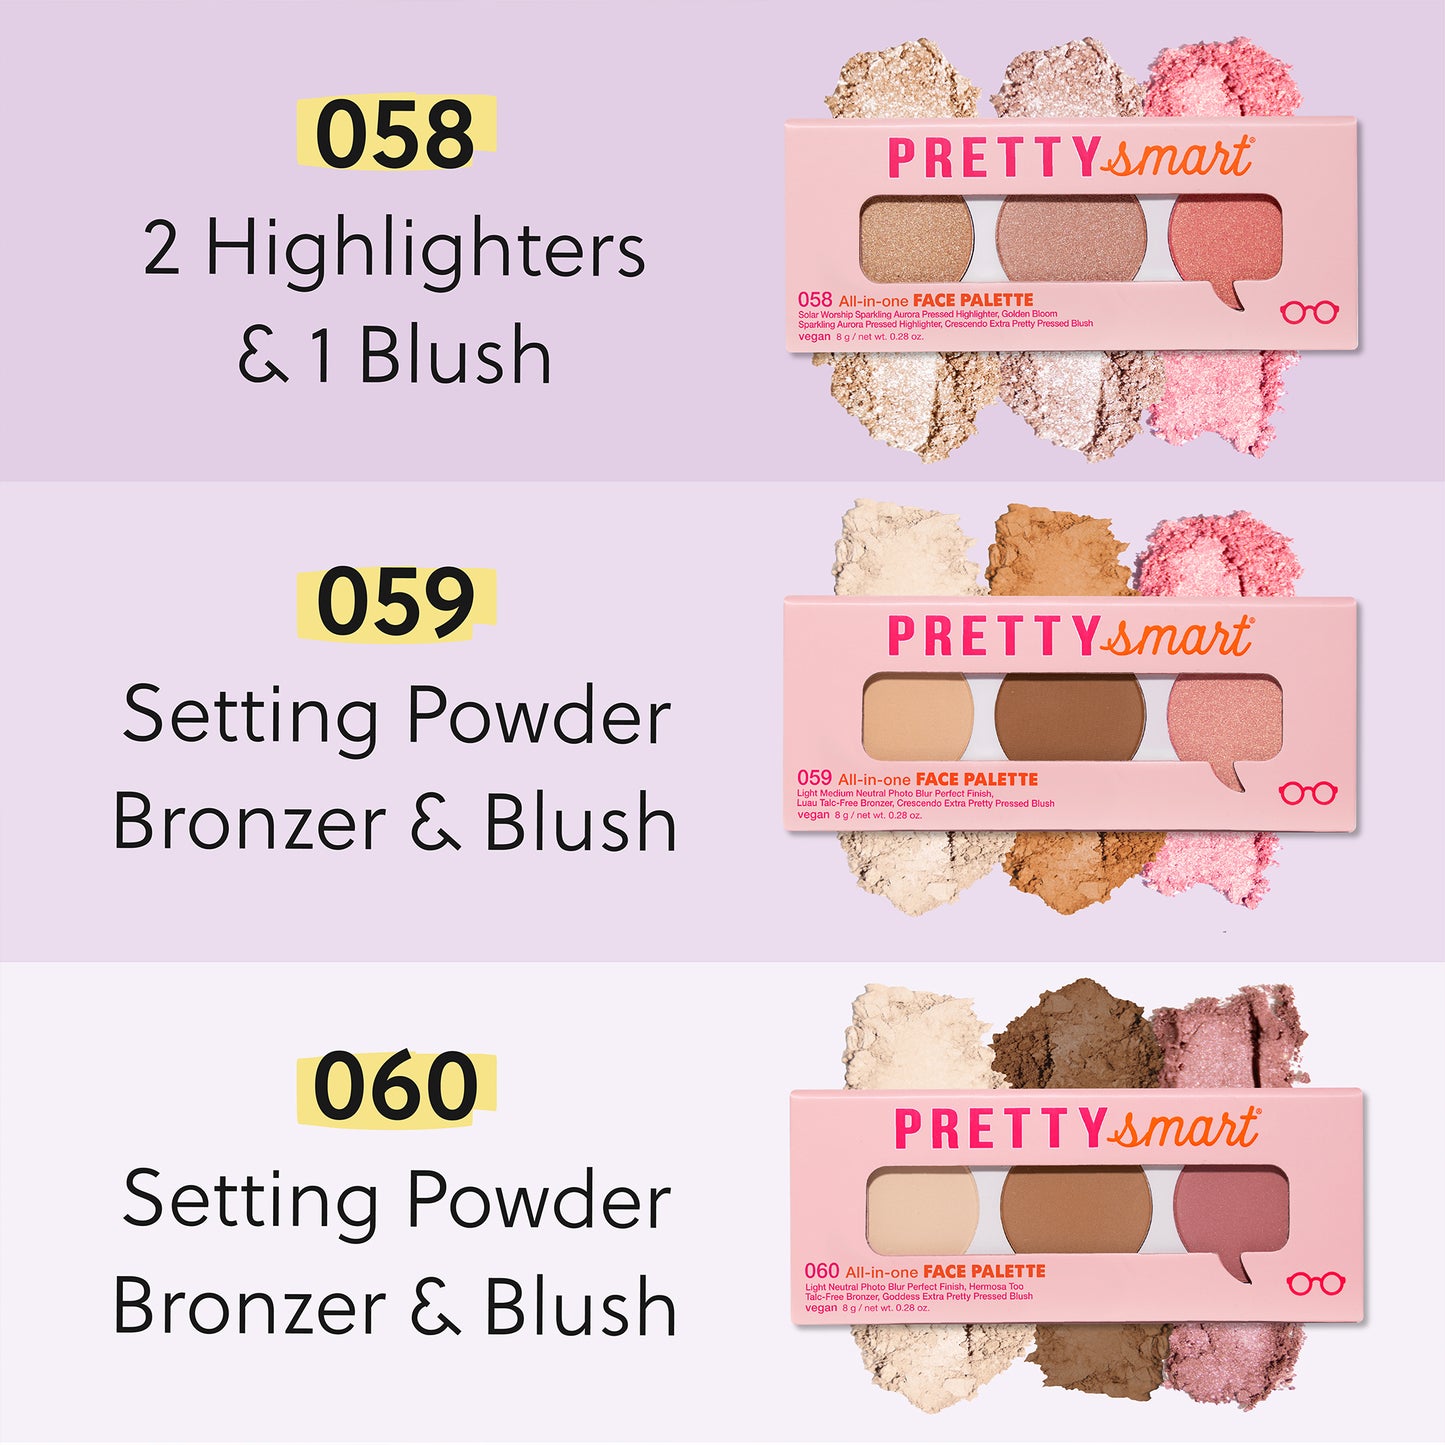 ALL-IN-ONE FACE PALETTE